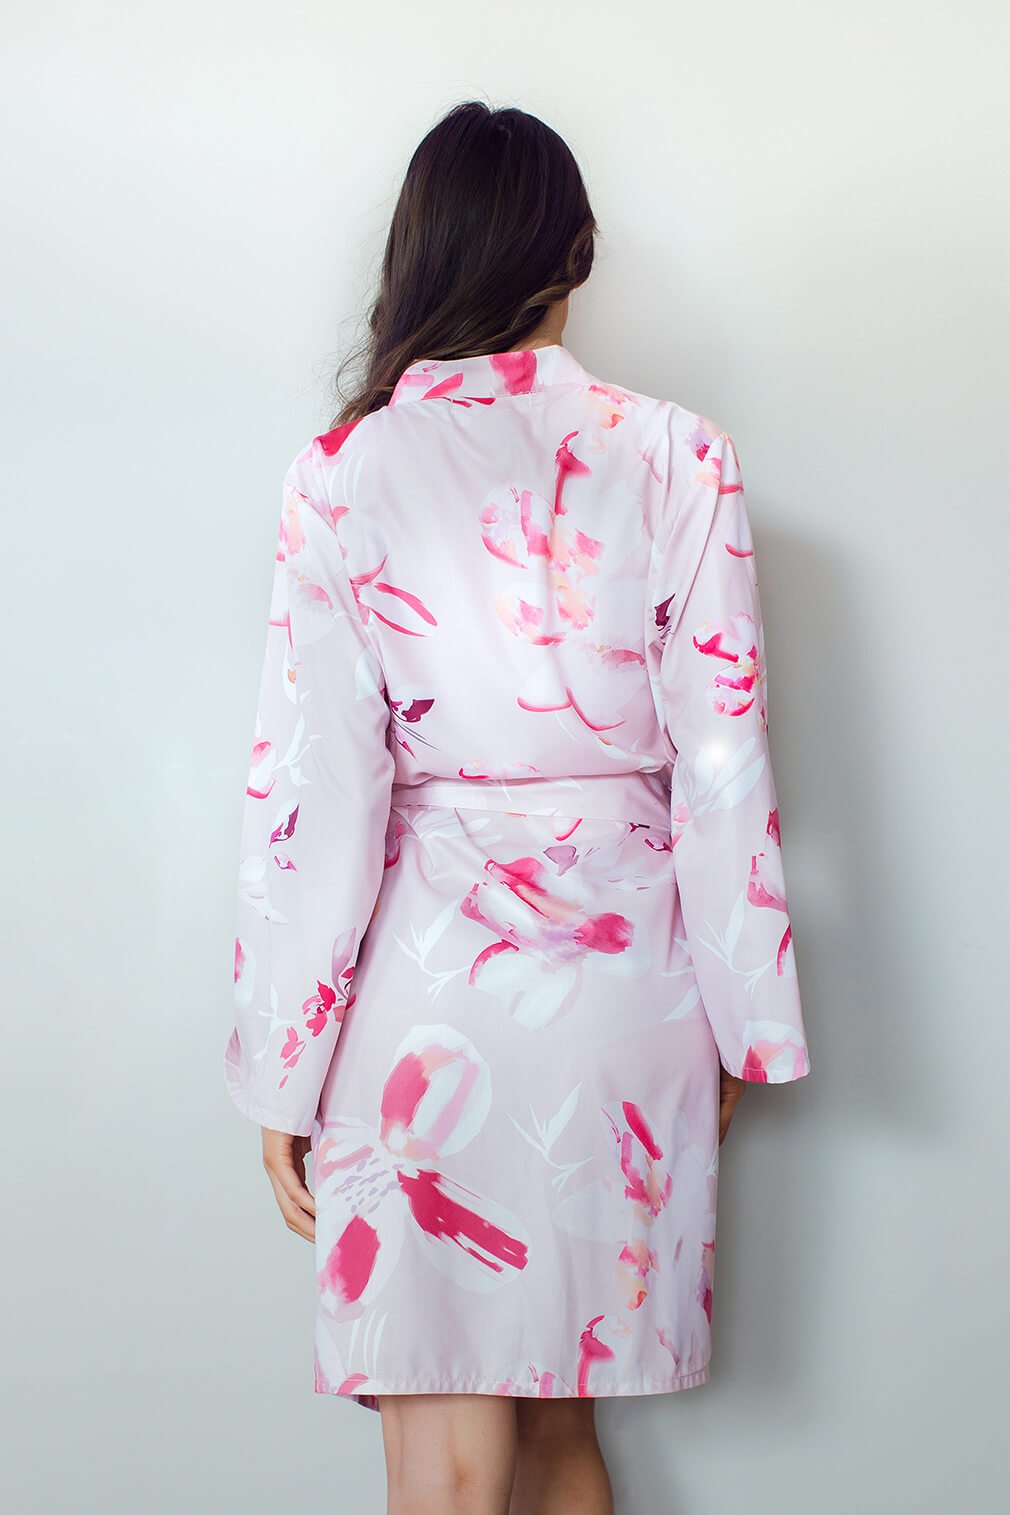 Pink floral bridal party robes NZ